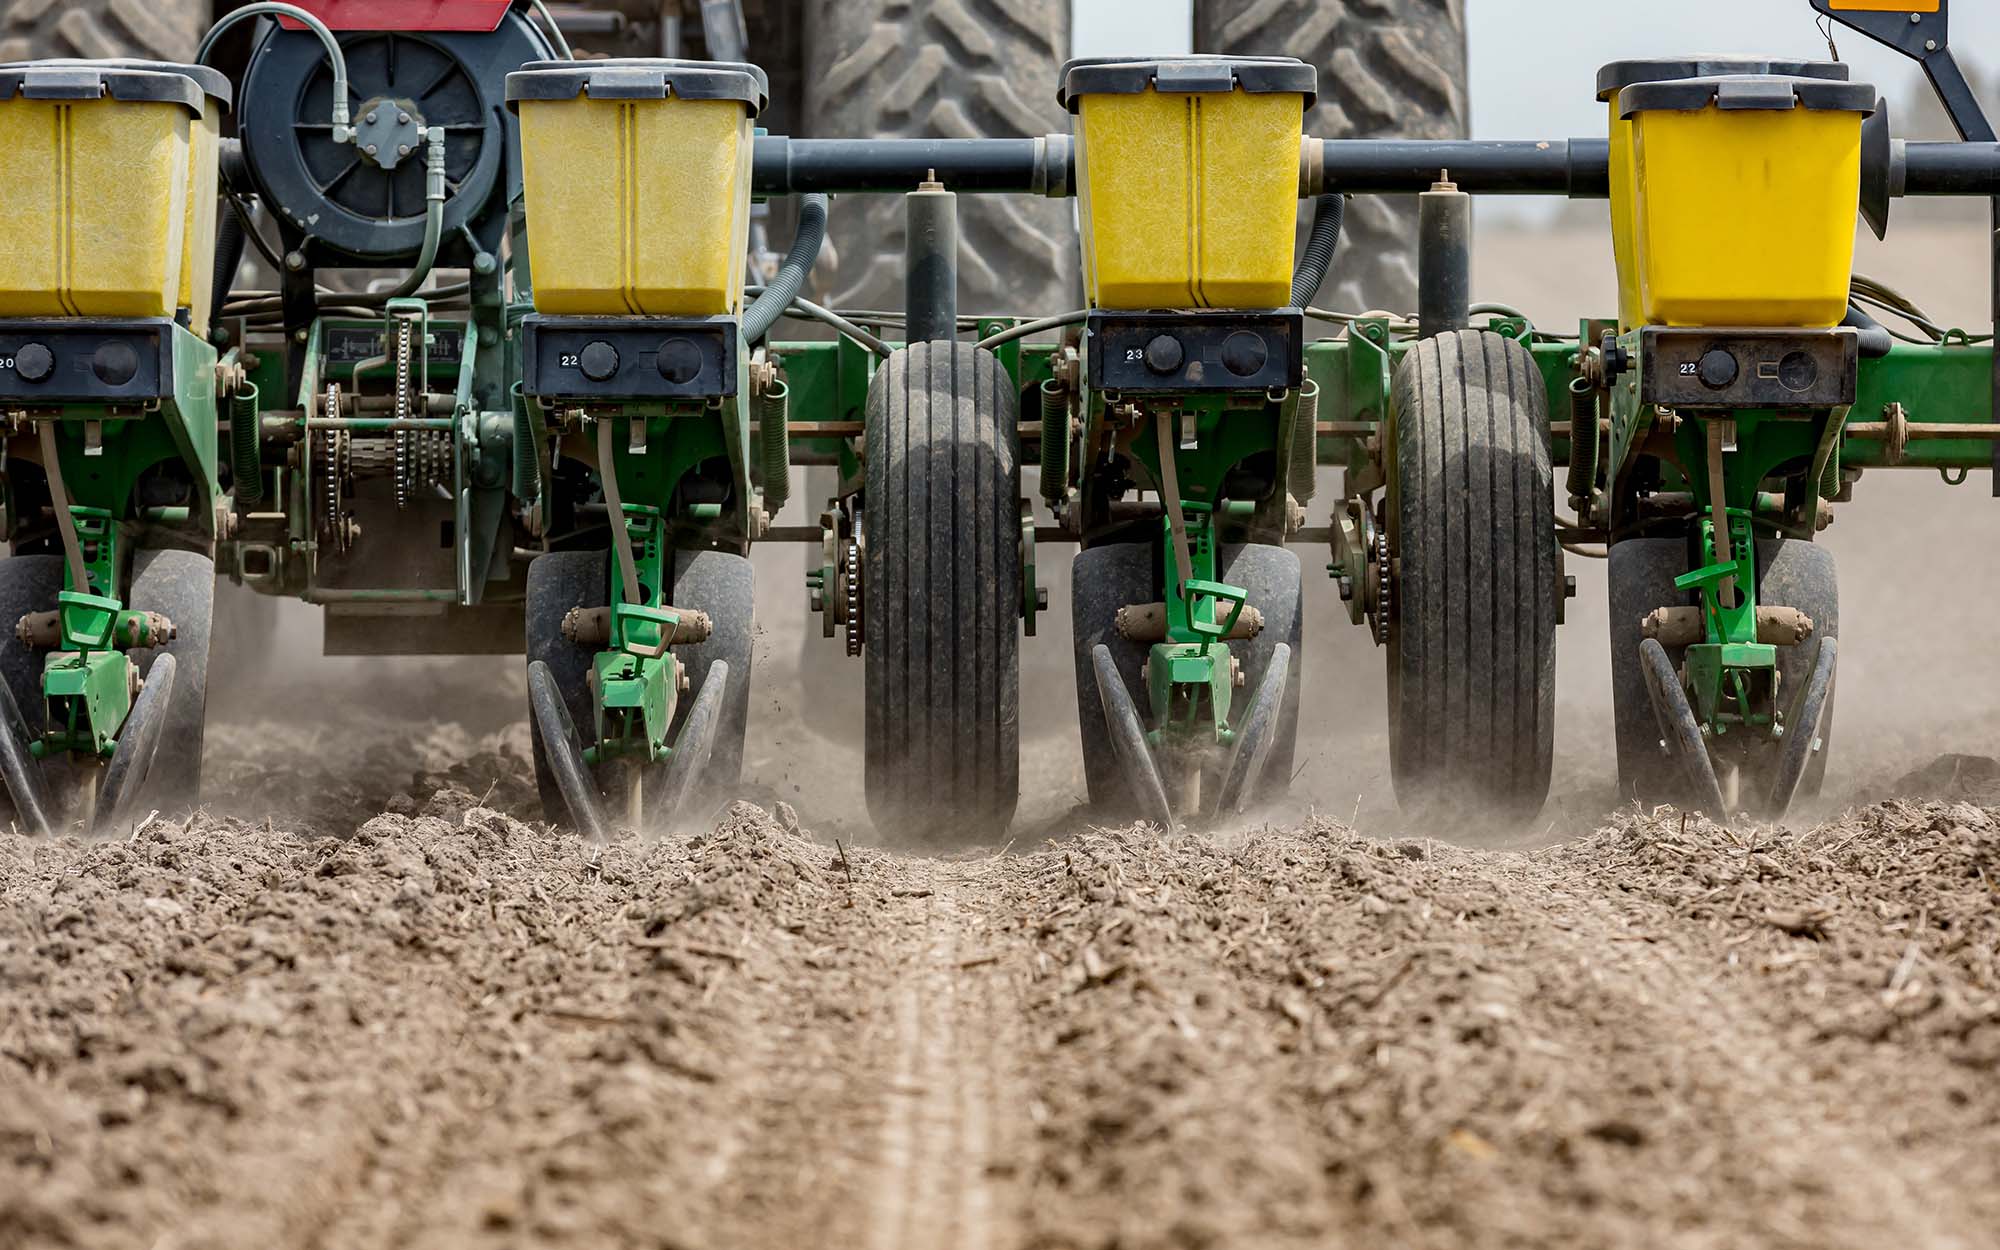 Tips & Tricks to Better Maintain Your Seed Planter